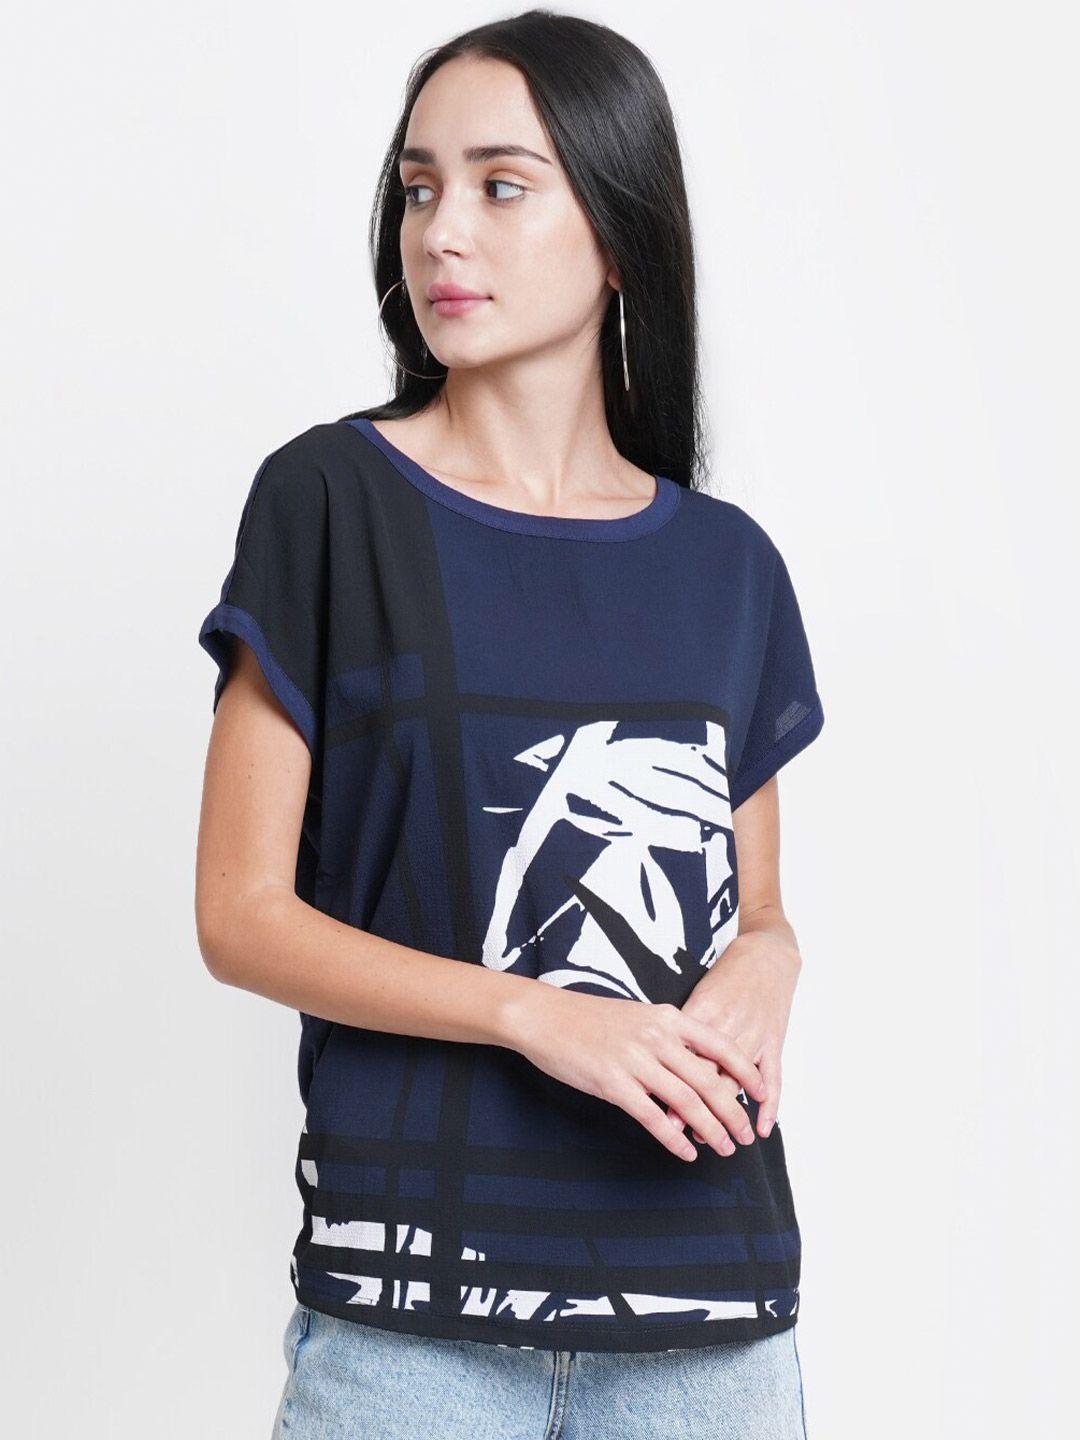 westclo blue & white graphic printed extended sleeves boxy top